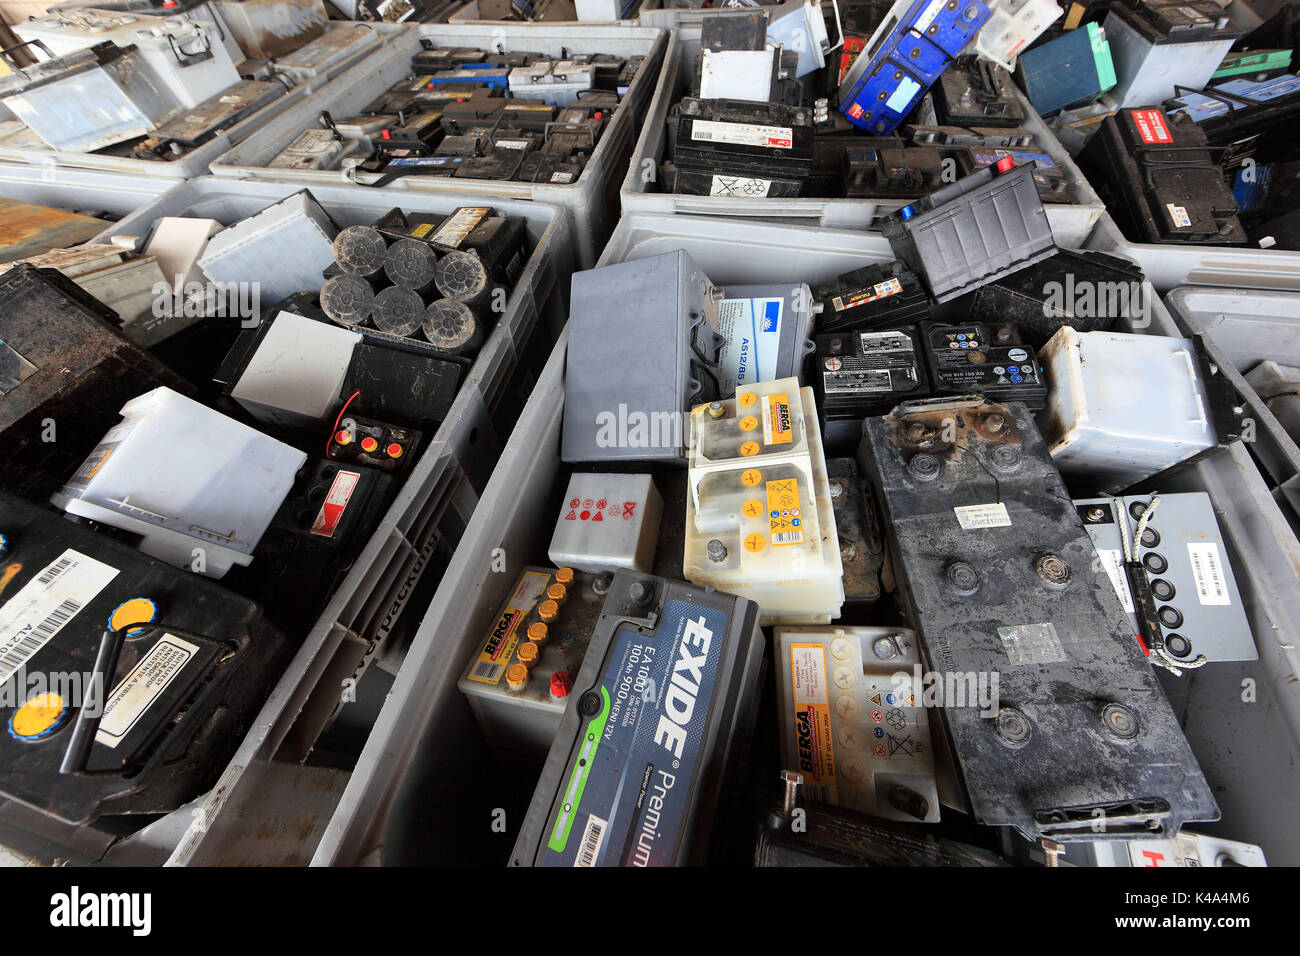 Recycling company, Recyling of old autobatteries, stock, Recyclingbetrieb, Recyling von alten Autobatterien, Lager Stock Photo